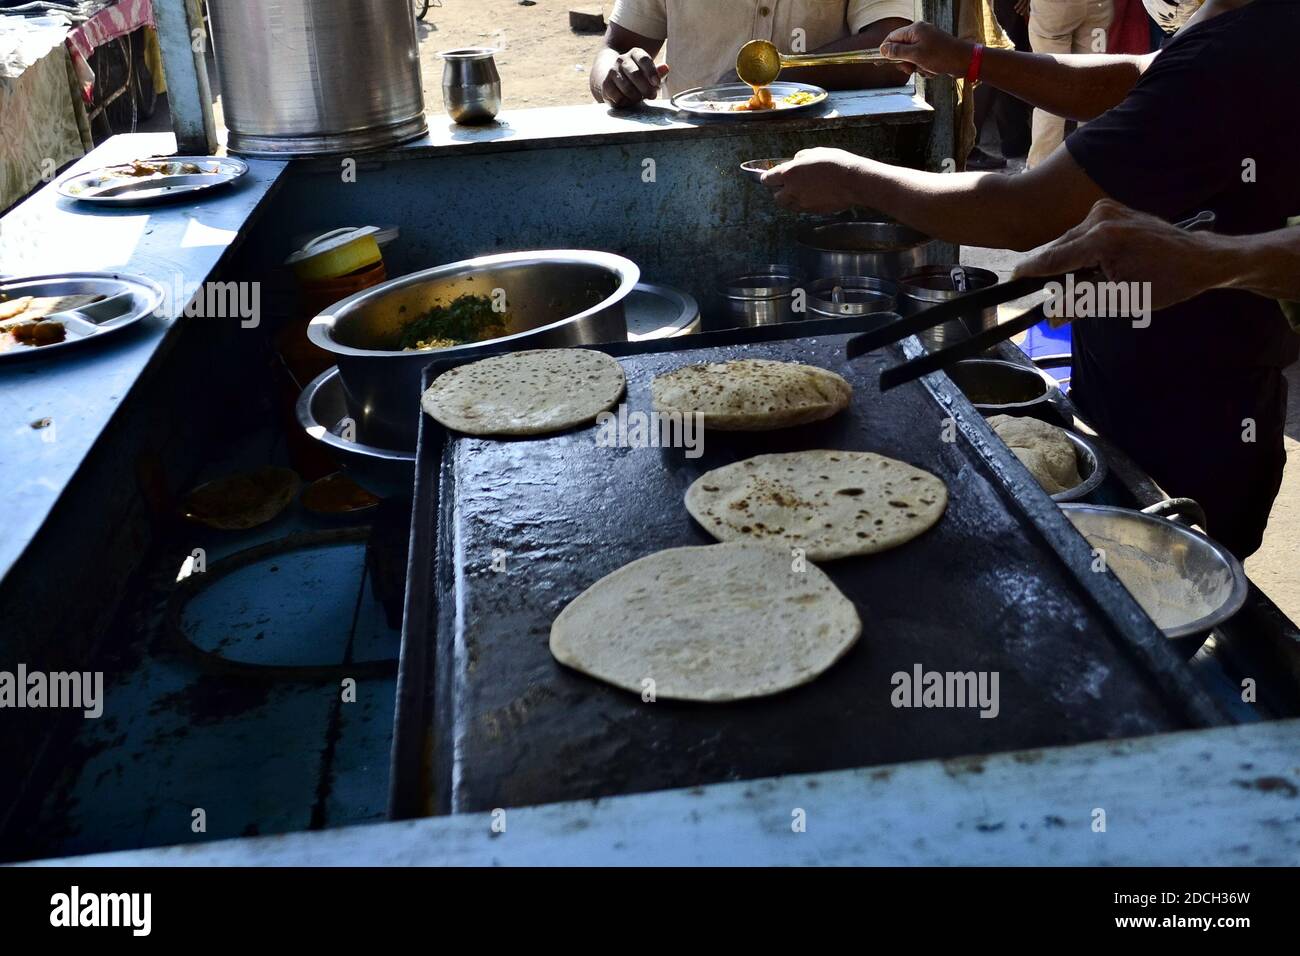 https://c8.alamy.com/comp/2DCH36W/man-making-chapati-indian-street-food-stall-roti-with-curry-for-breakfast-on-the-street-market-in-the-morning-2DCH36W.jpg